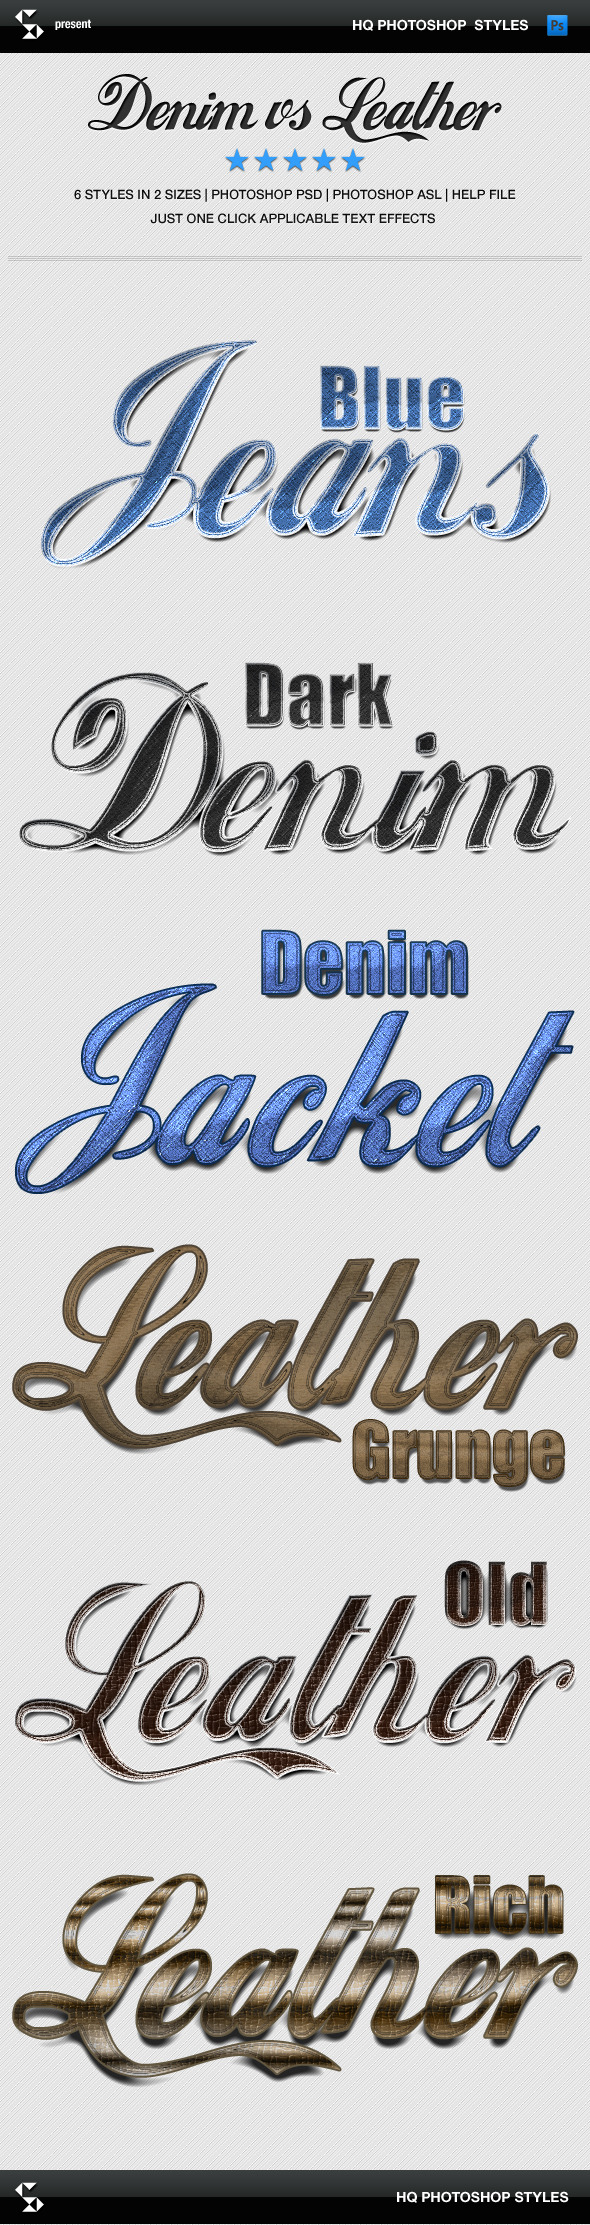 Denim and Leather Styles - Jeans and Leather